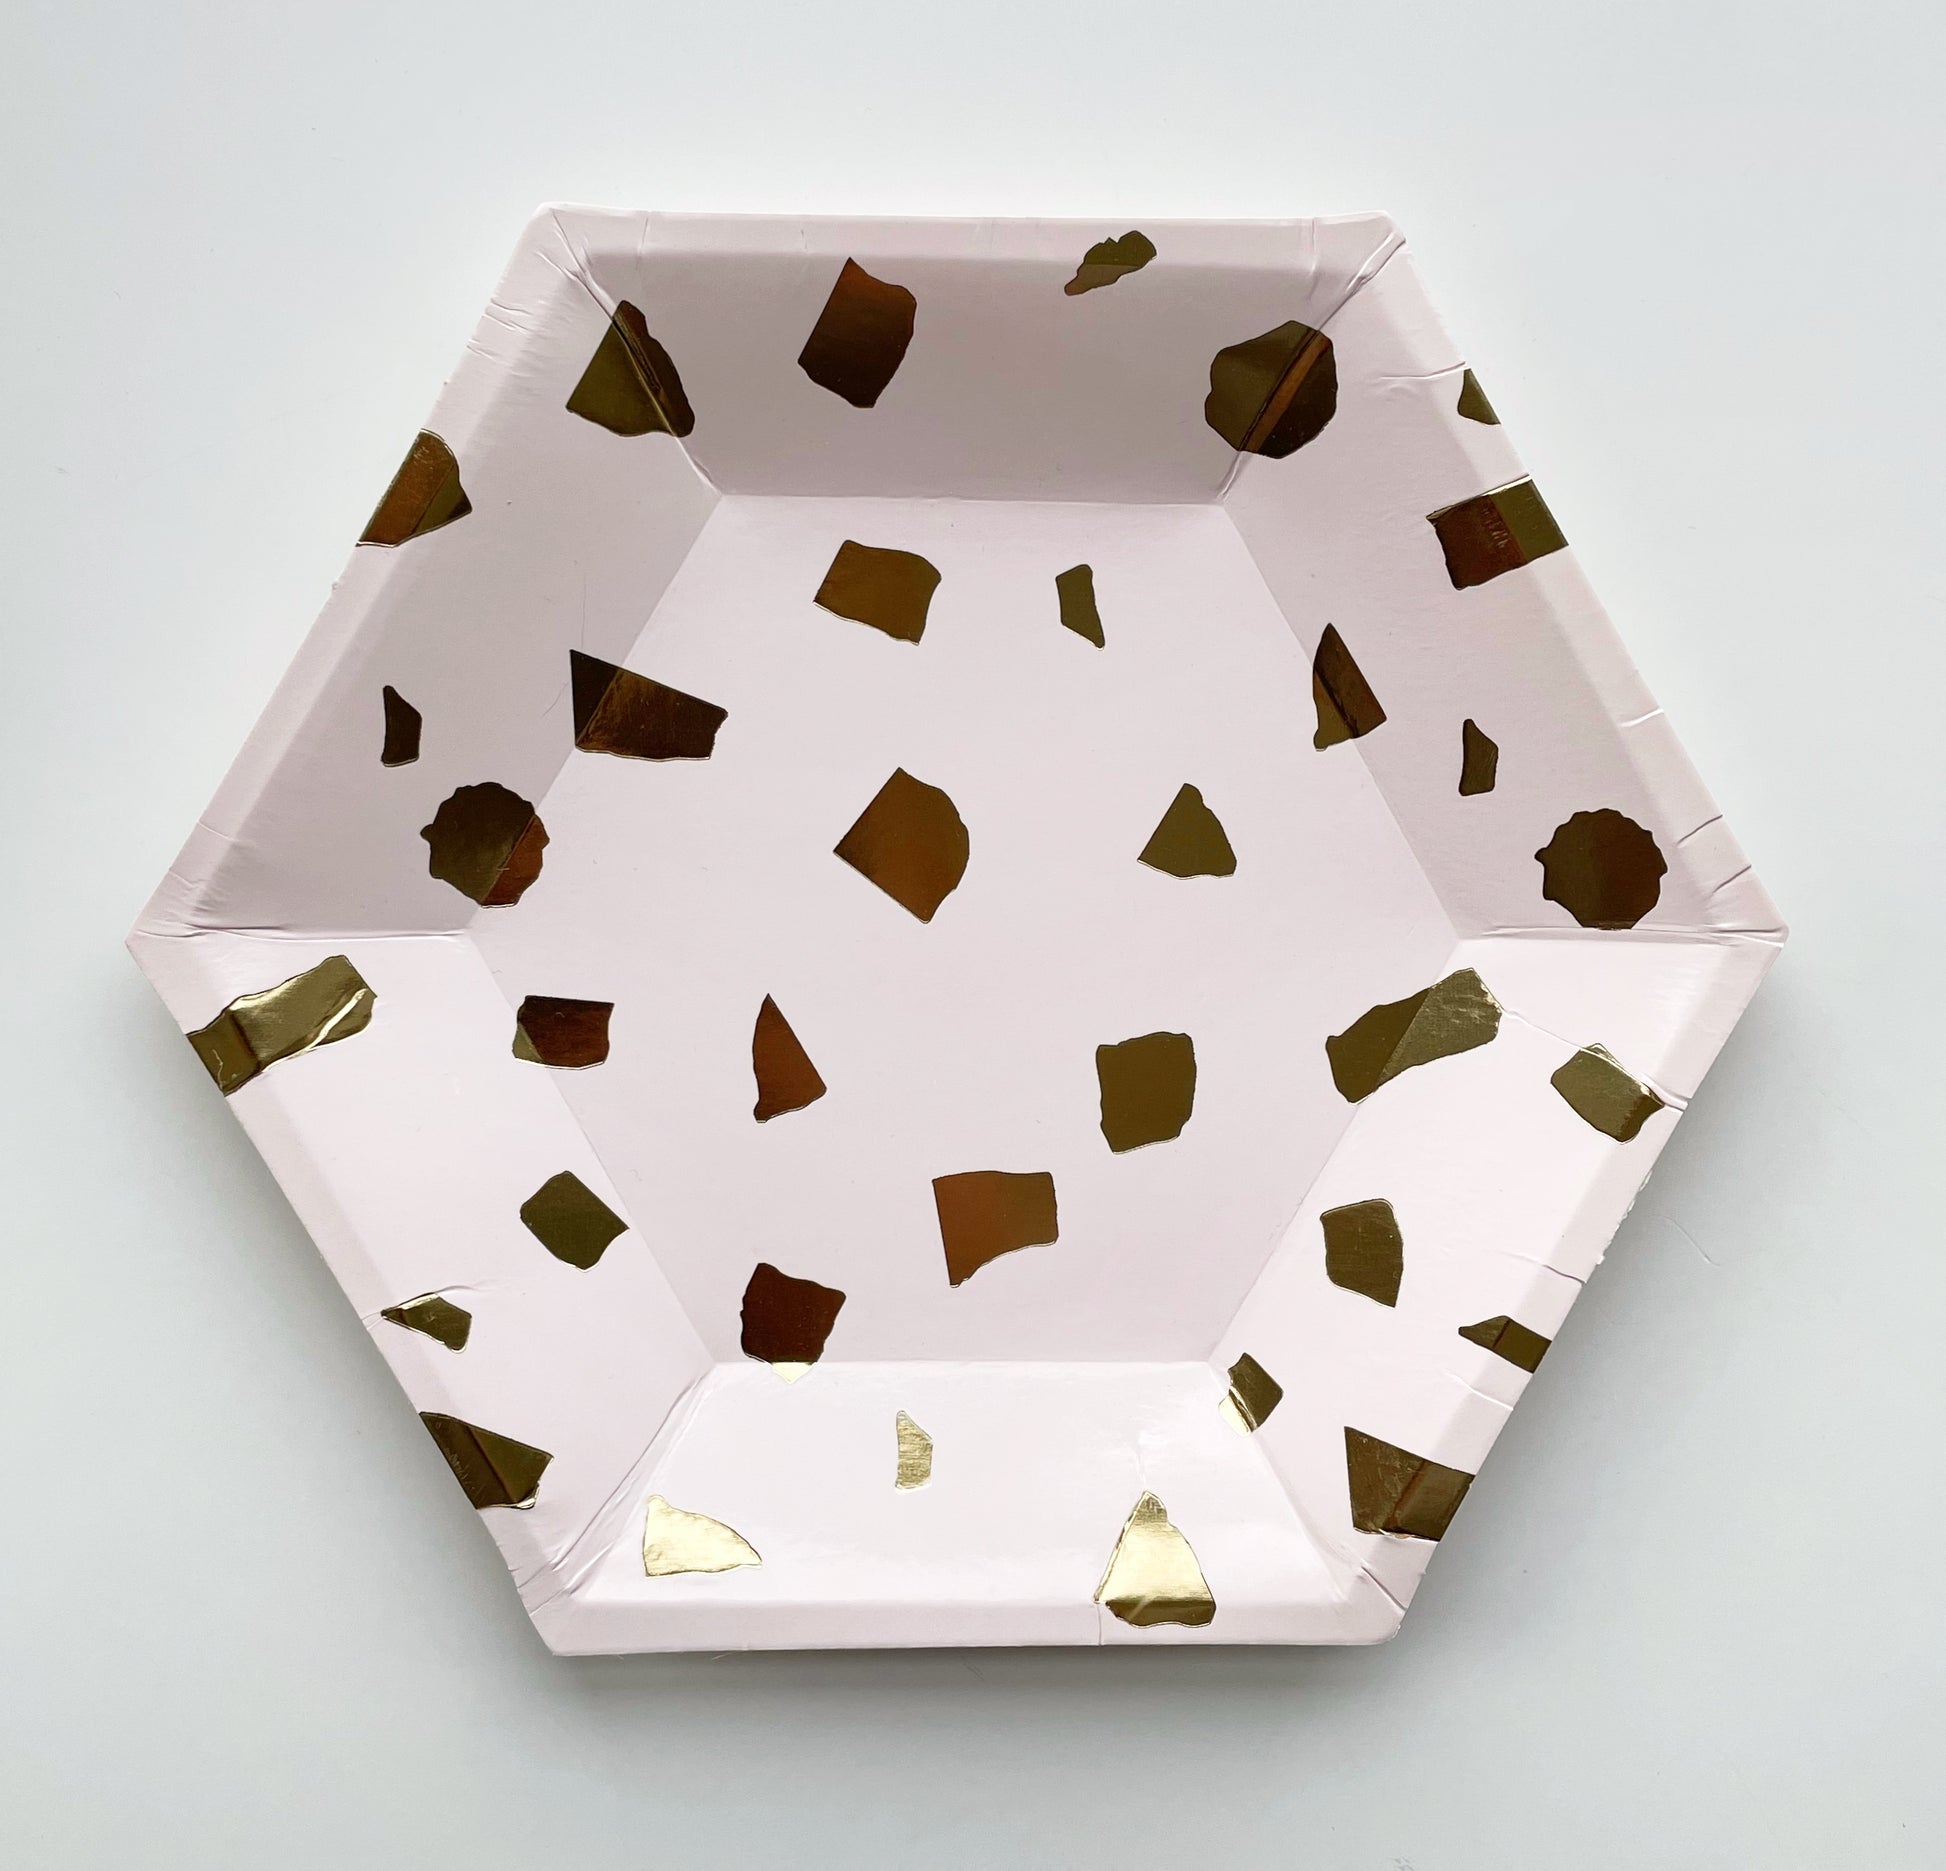 The large paper party plates are in the shape of a hexagon. The plates are a pale blush pink colour with gold foil detail.